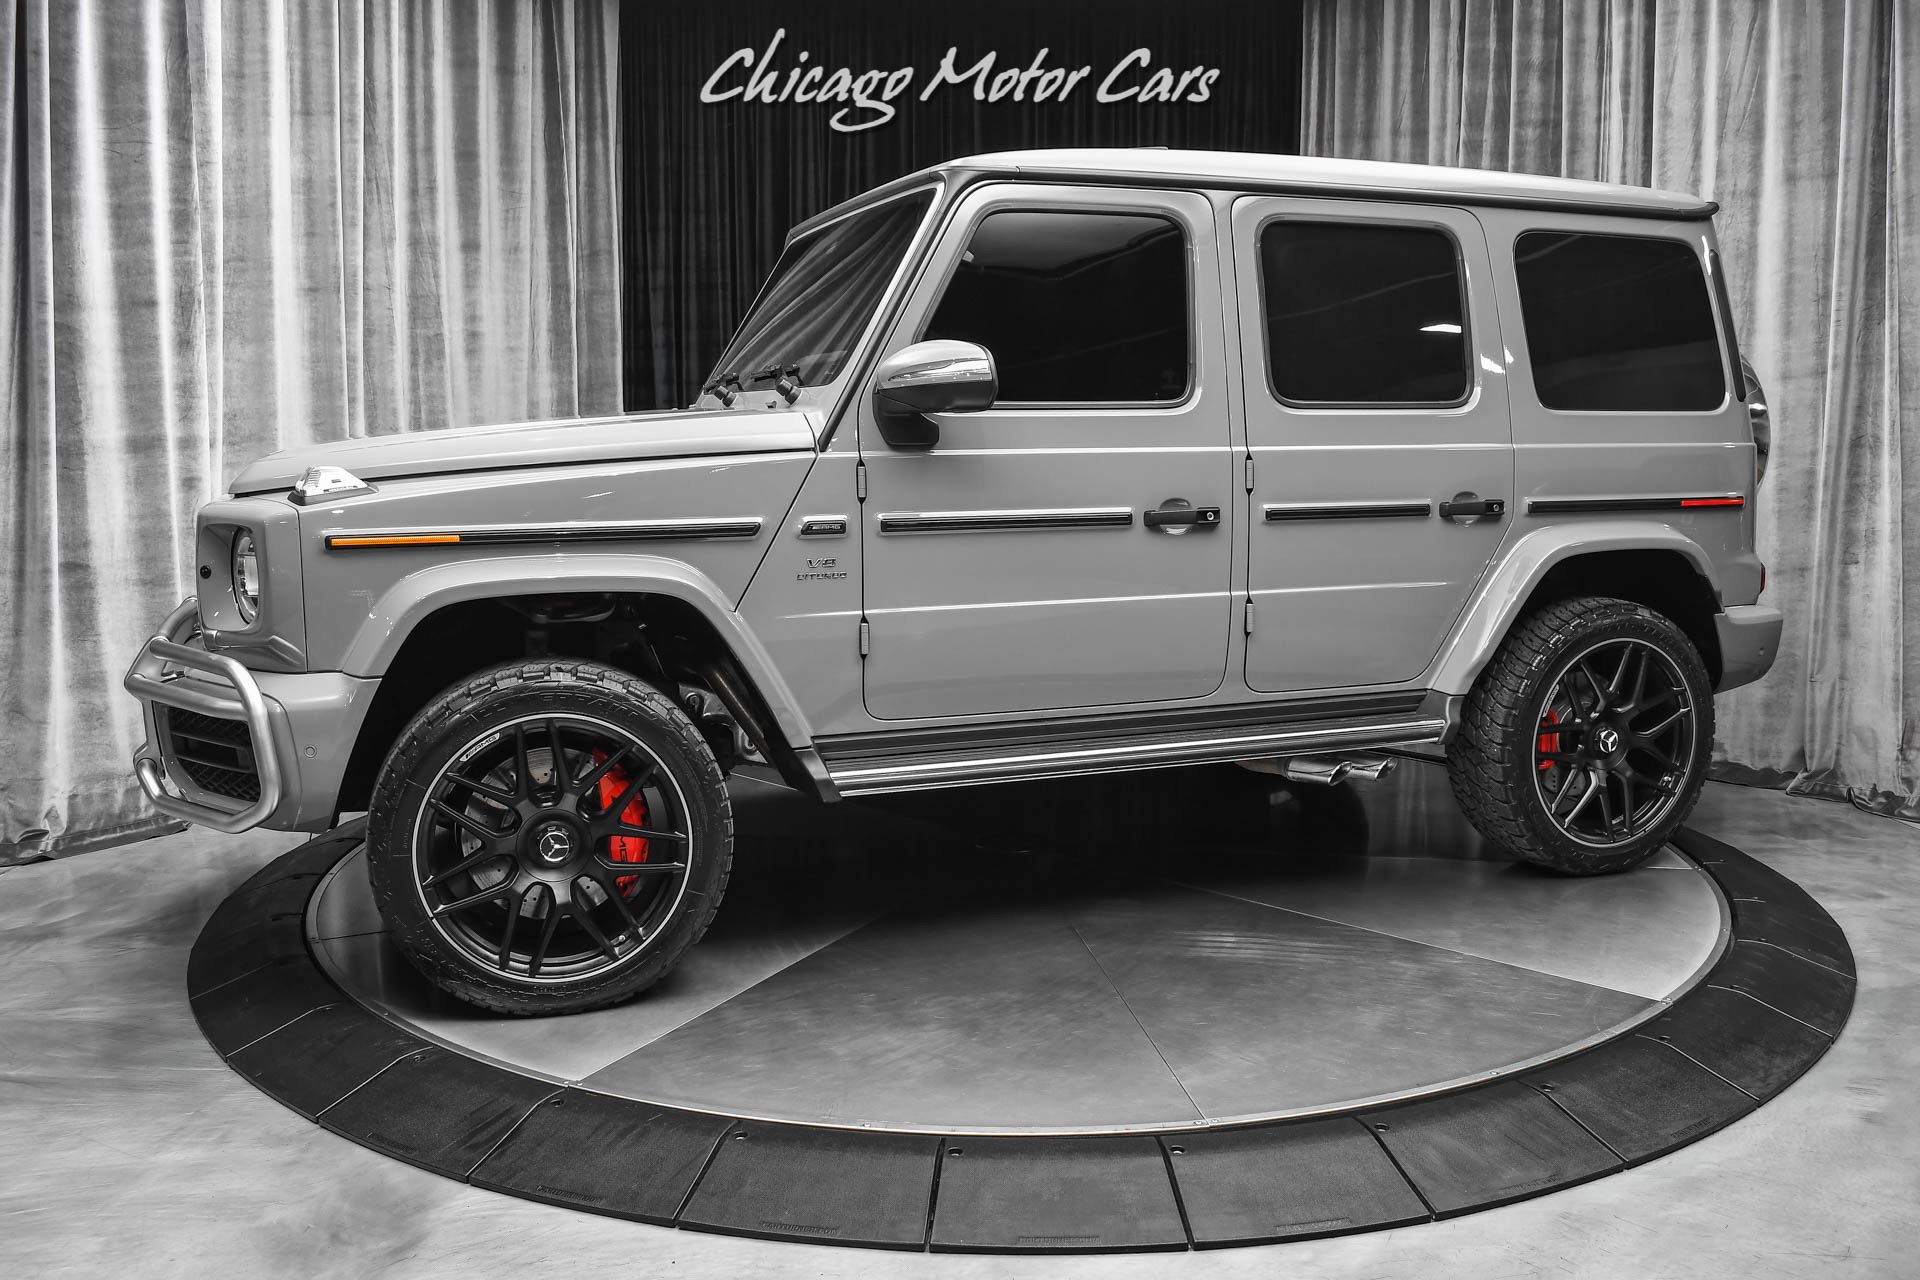 Used 21 Mercedes Benz G63 Amg 4matic Suv Rare G Manufaktur Arabian Grey 8k Miles Front Ppf Loaded For Sale 239 800 Midwest Truck Group Stock b